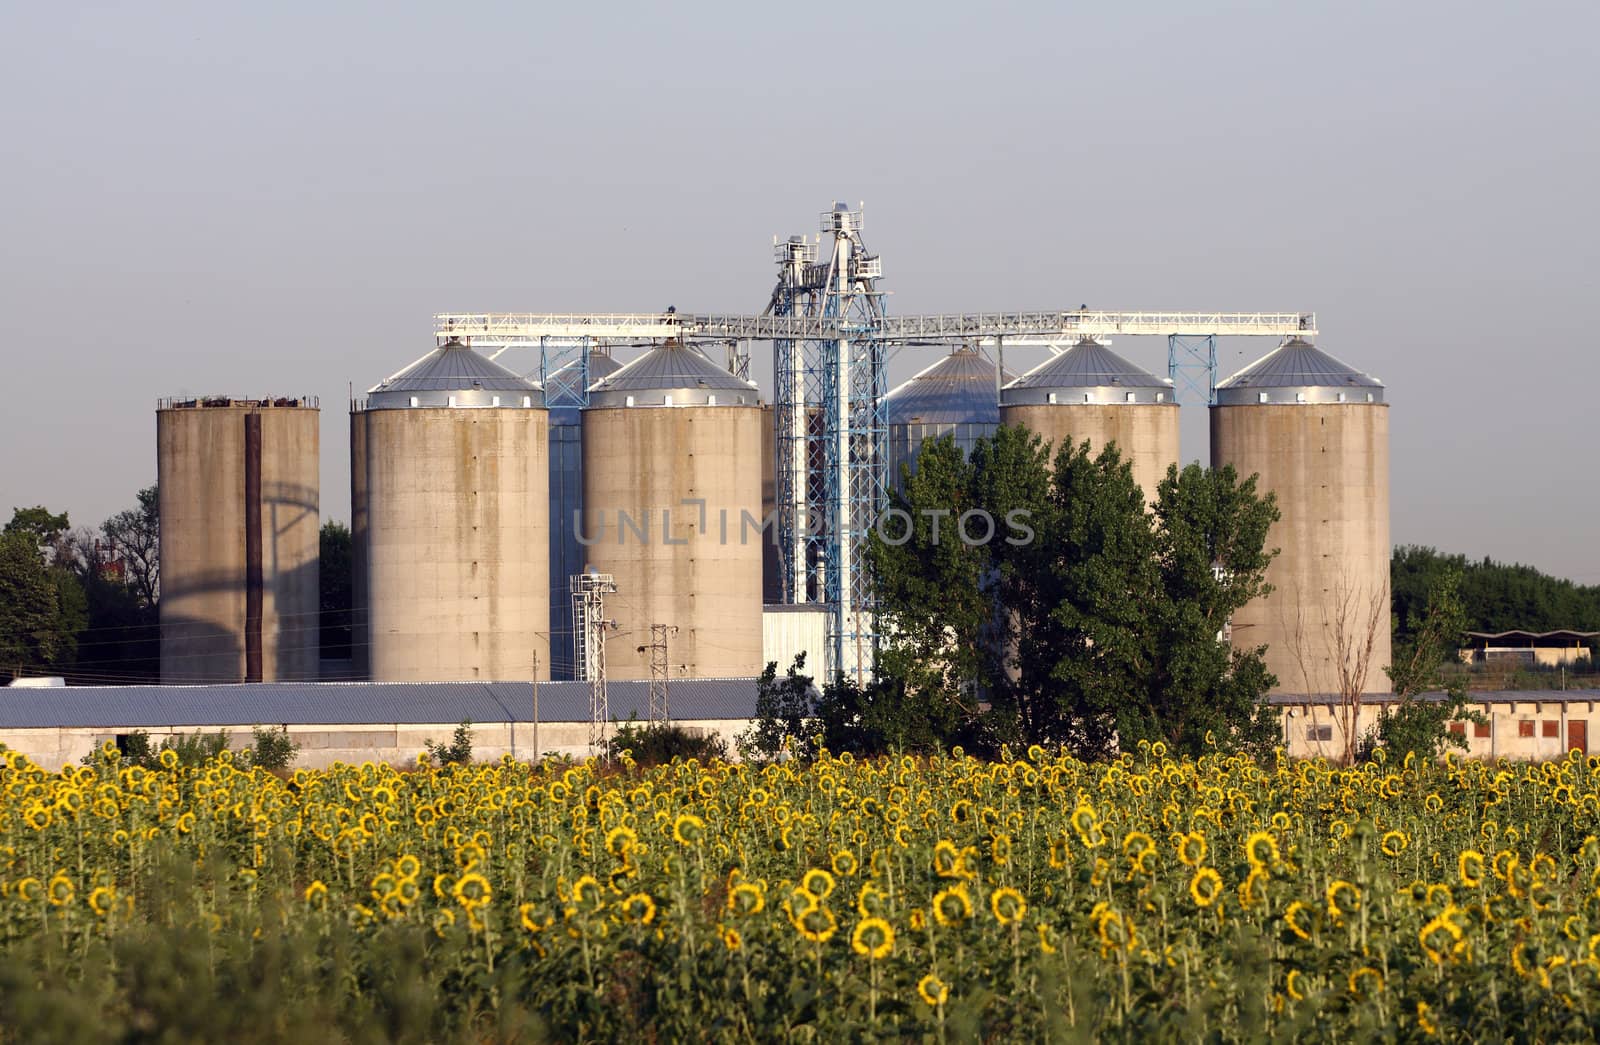 View of grain silos and sunflower field